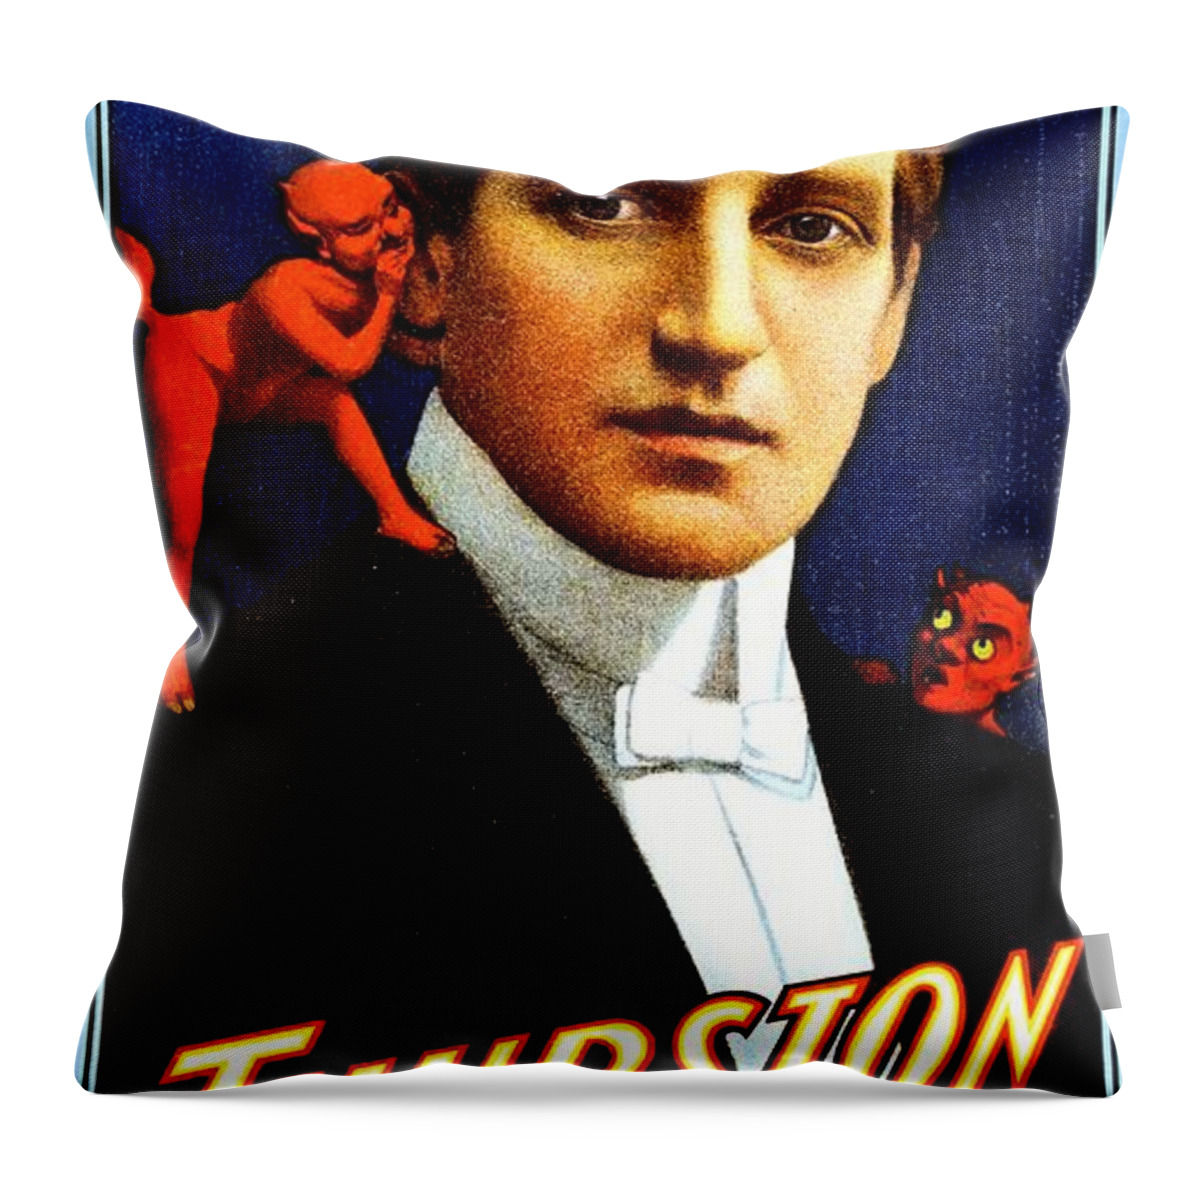 Thurston Throw Pillow featuring the painting Thurston, Kellar's successor, magician poster, 1908 by Vincent Monozlay